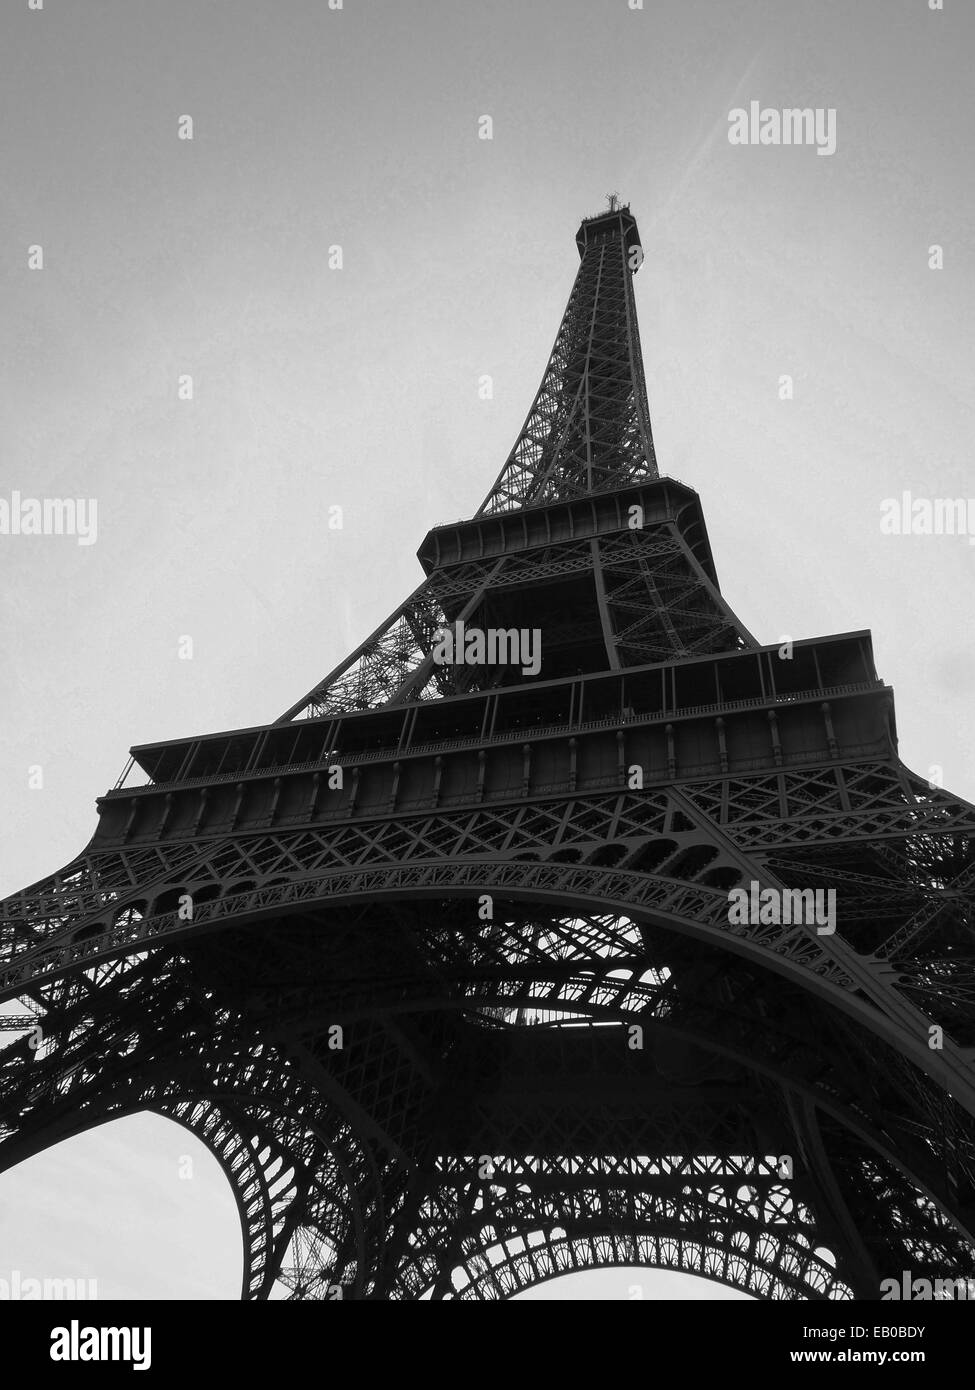 View of Eiffel tower, Paris in black and white from the ground, looking to the top. Stock Photo